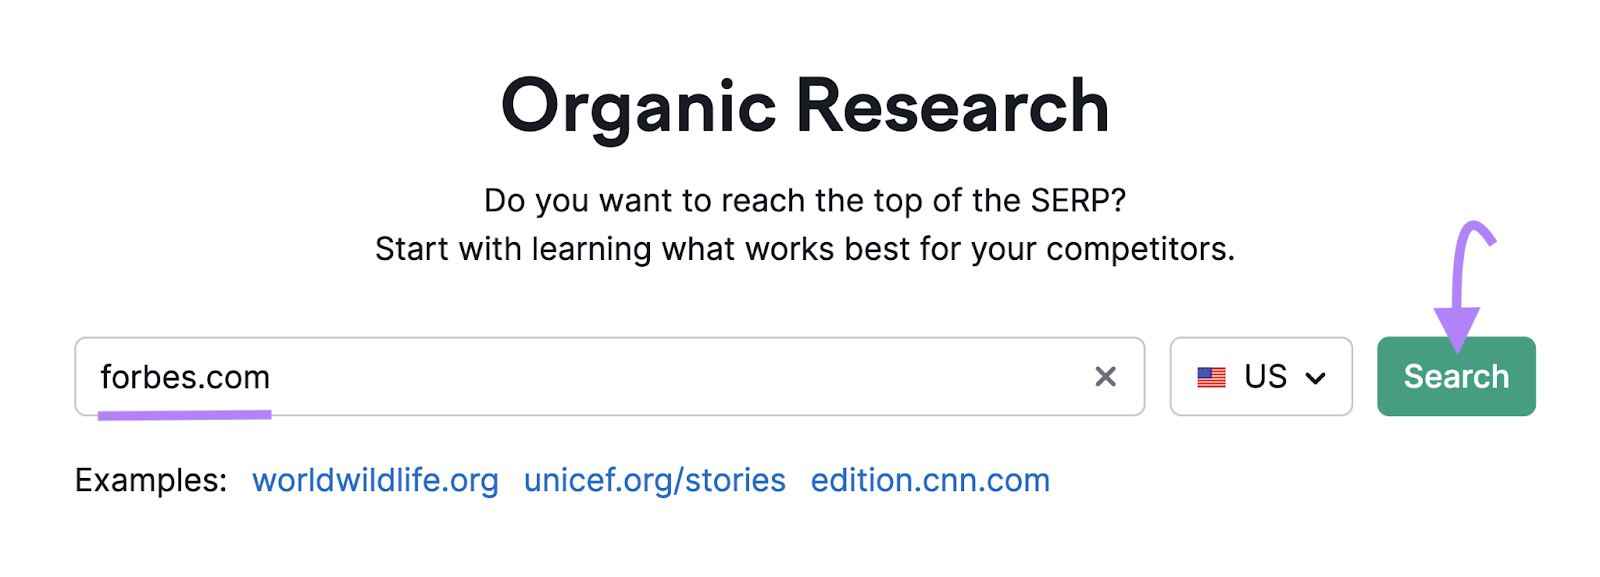 "forbes.com" entered into the Organic Research tool.search bar